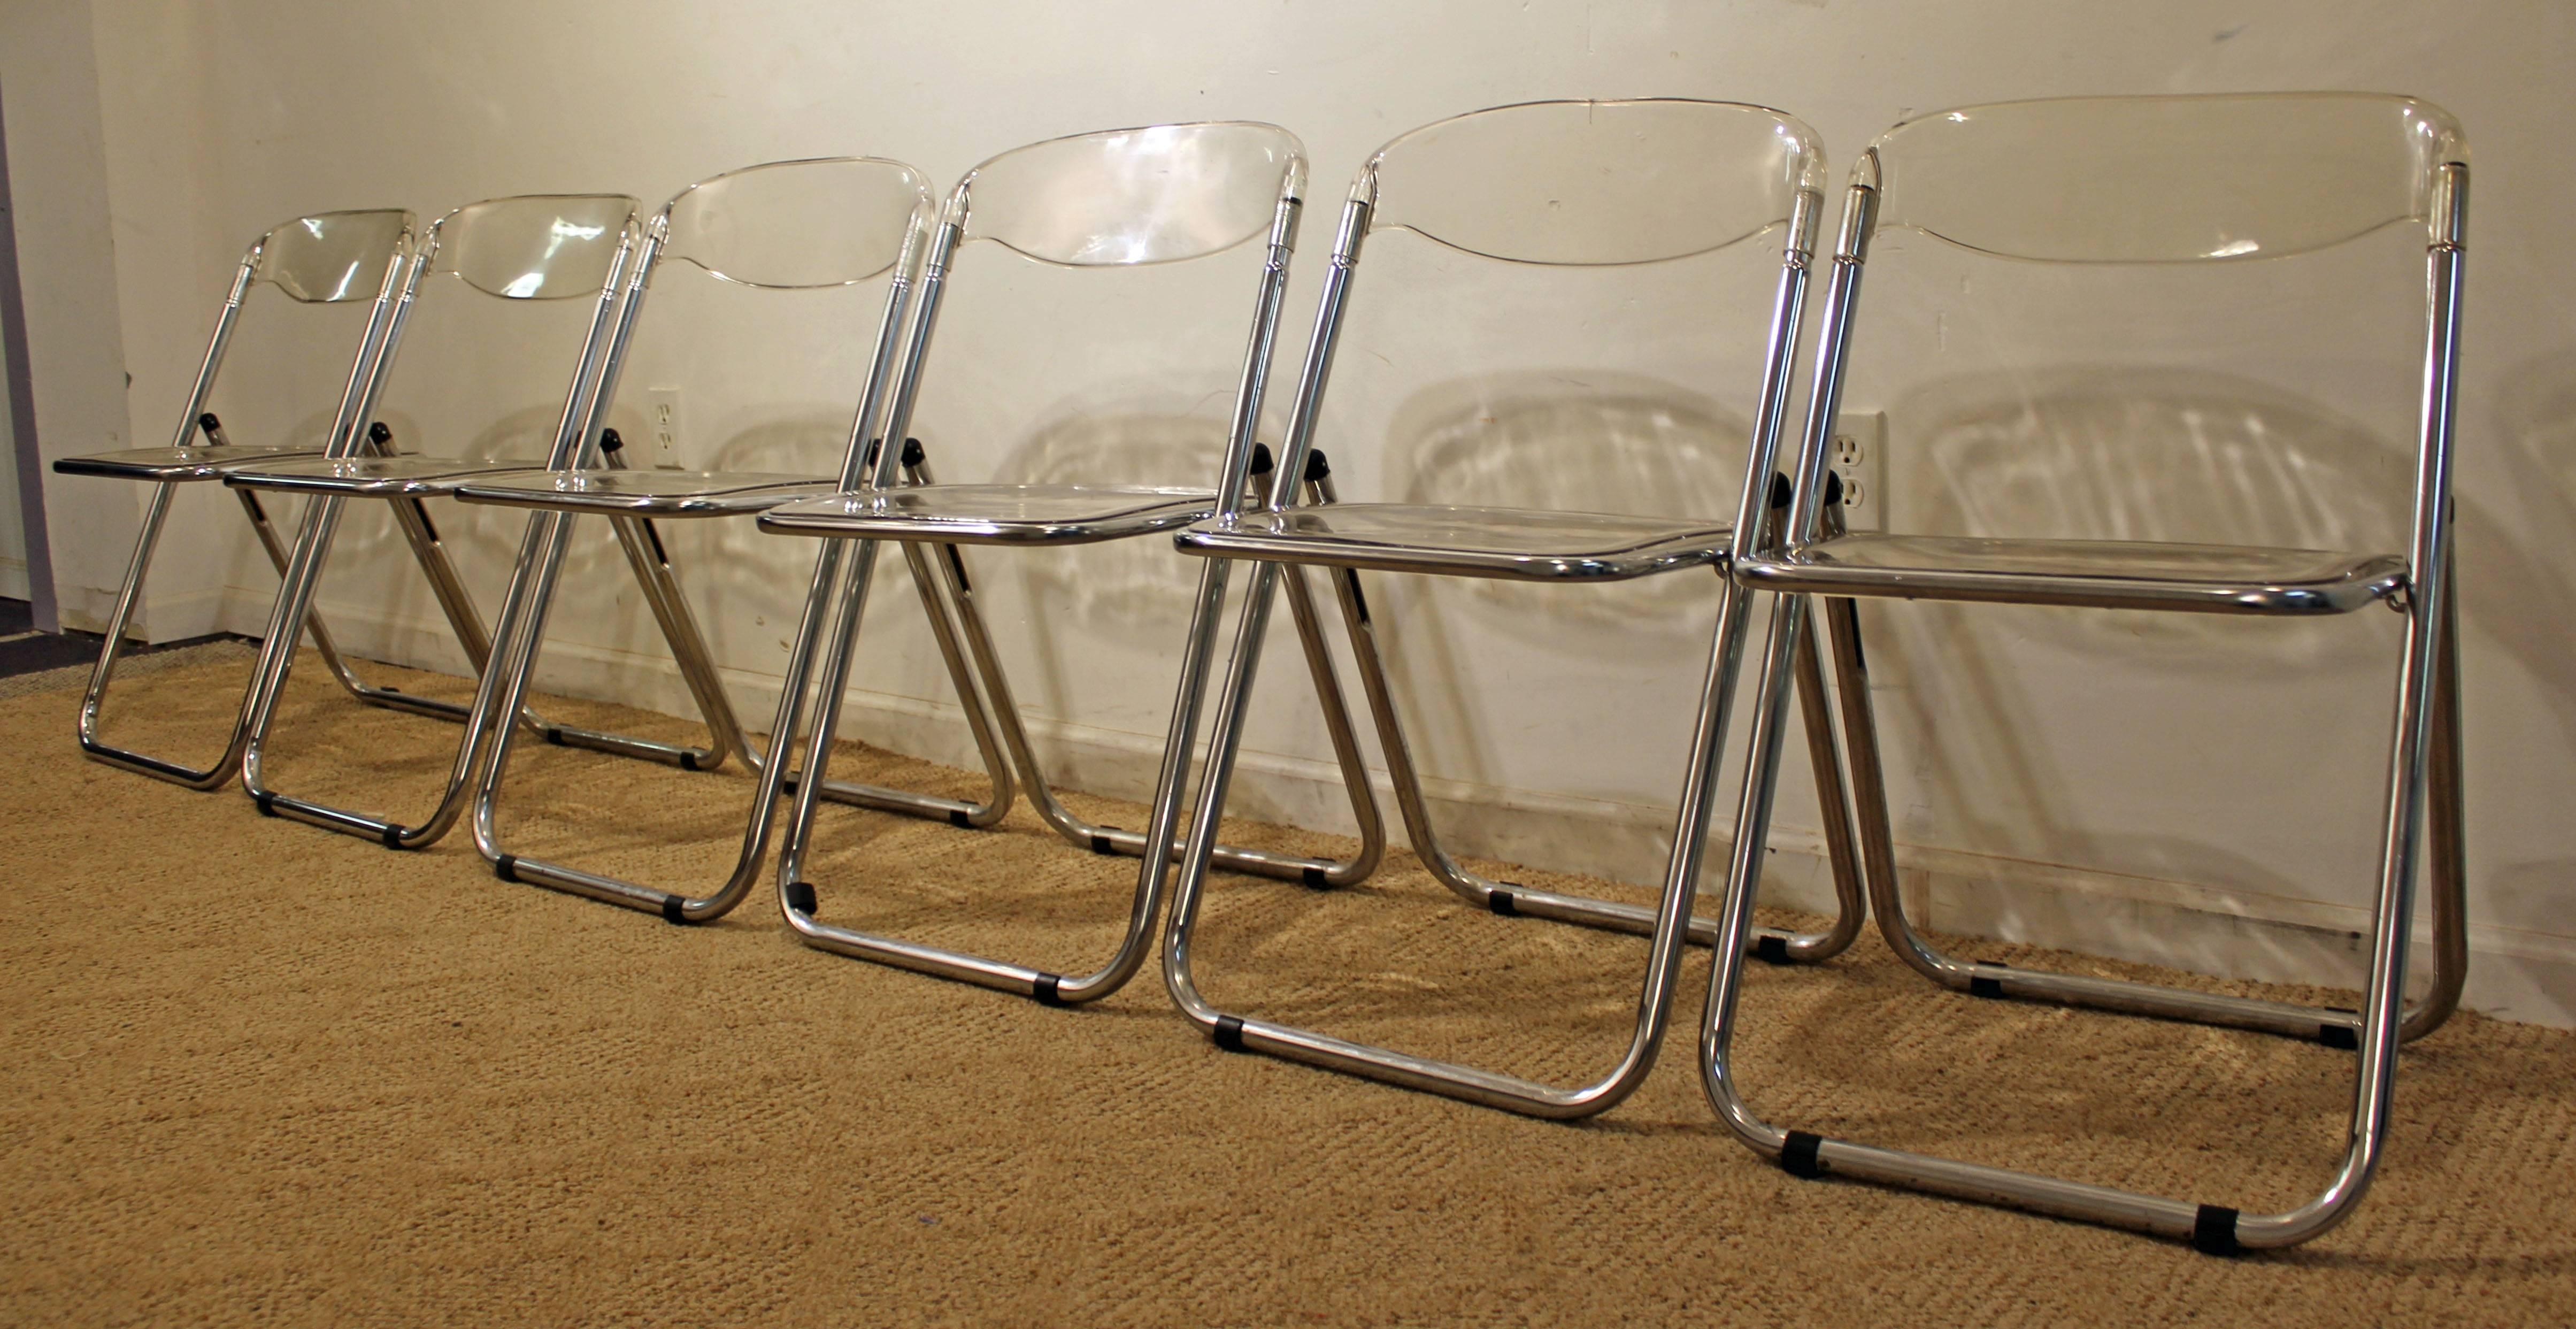 Offered is a set of six Mid-Century Modern Lucite and chrome folding chairs. They are in good condition, showing some normal age wear. They are not signed.


Approximate dimensions:
18.5